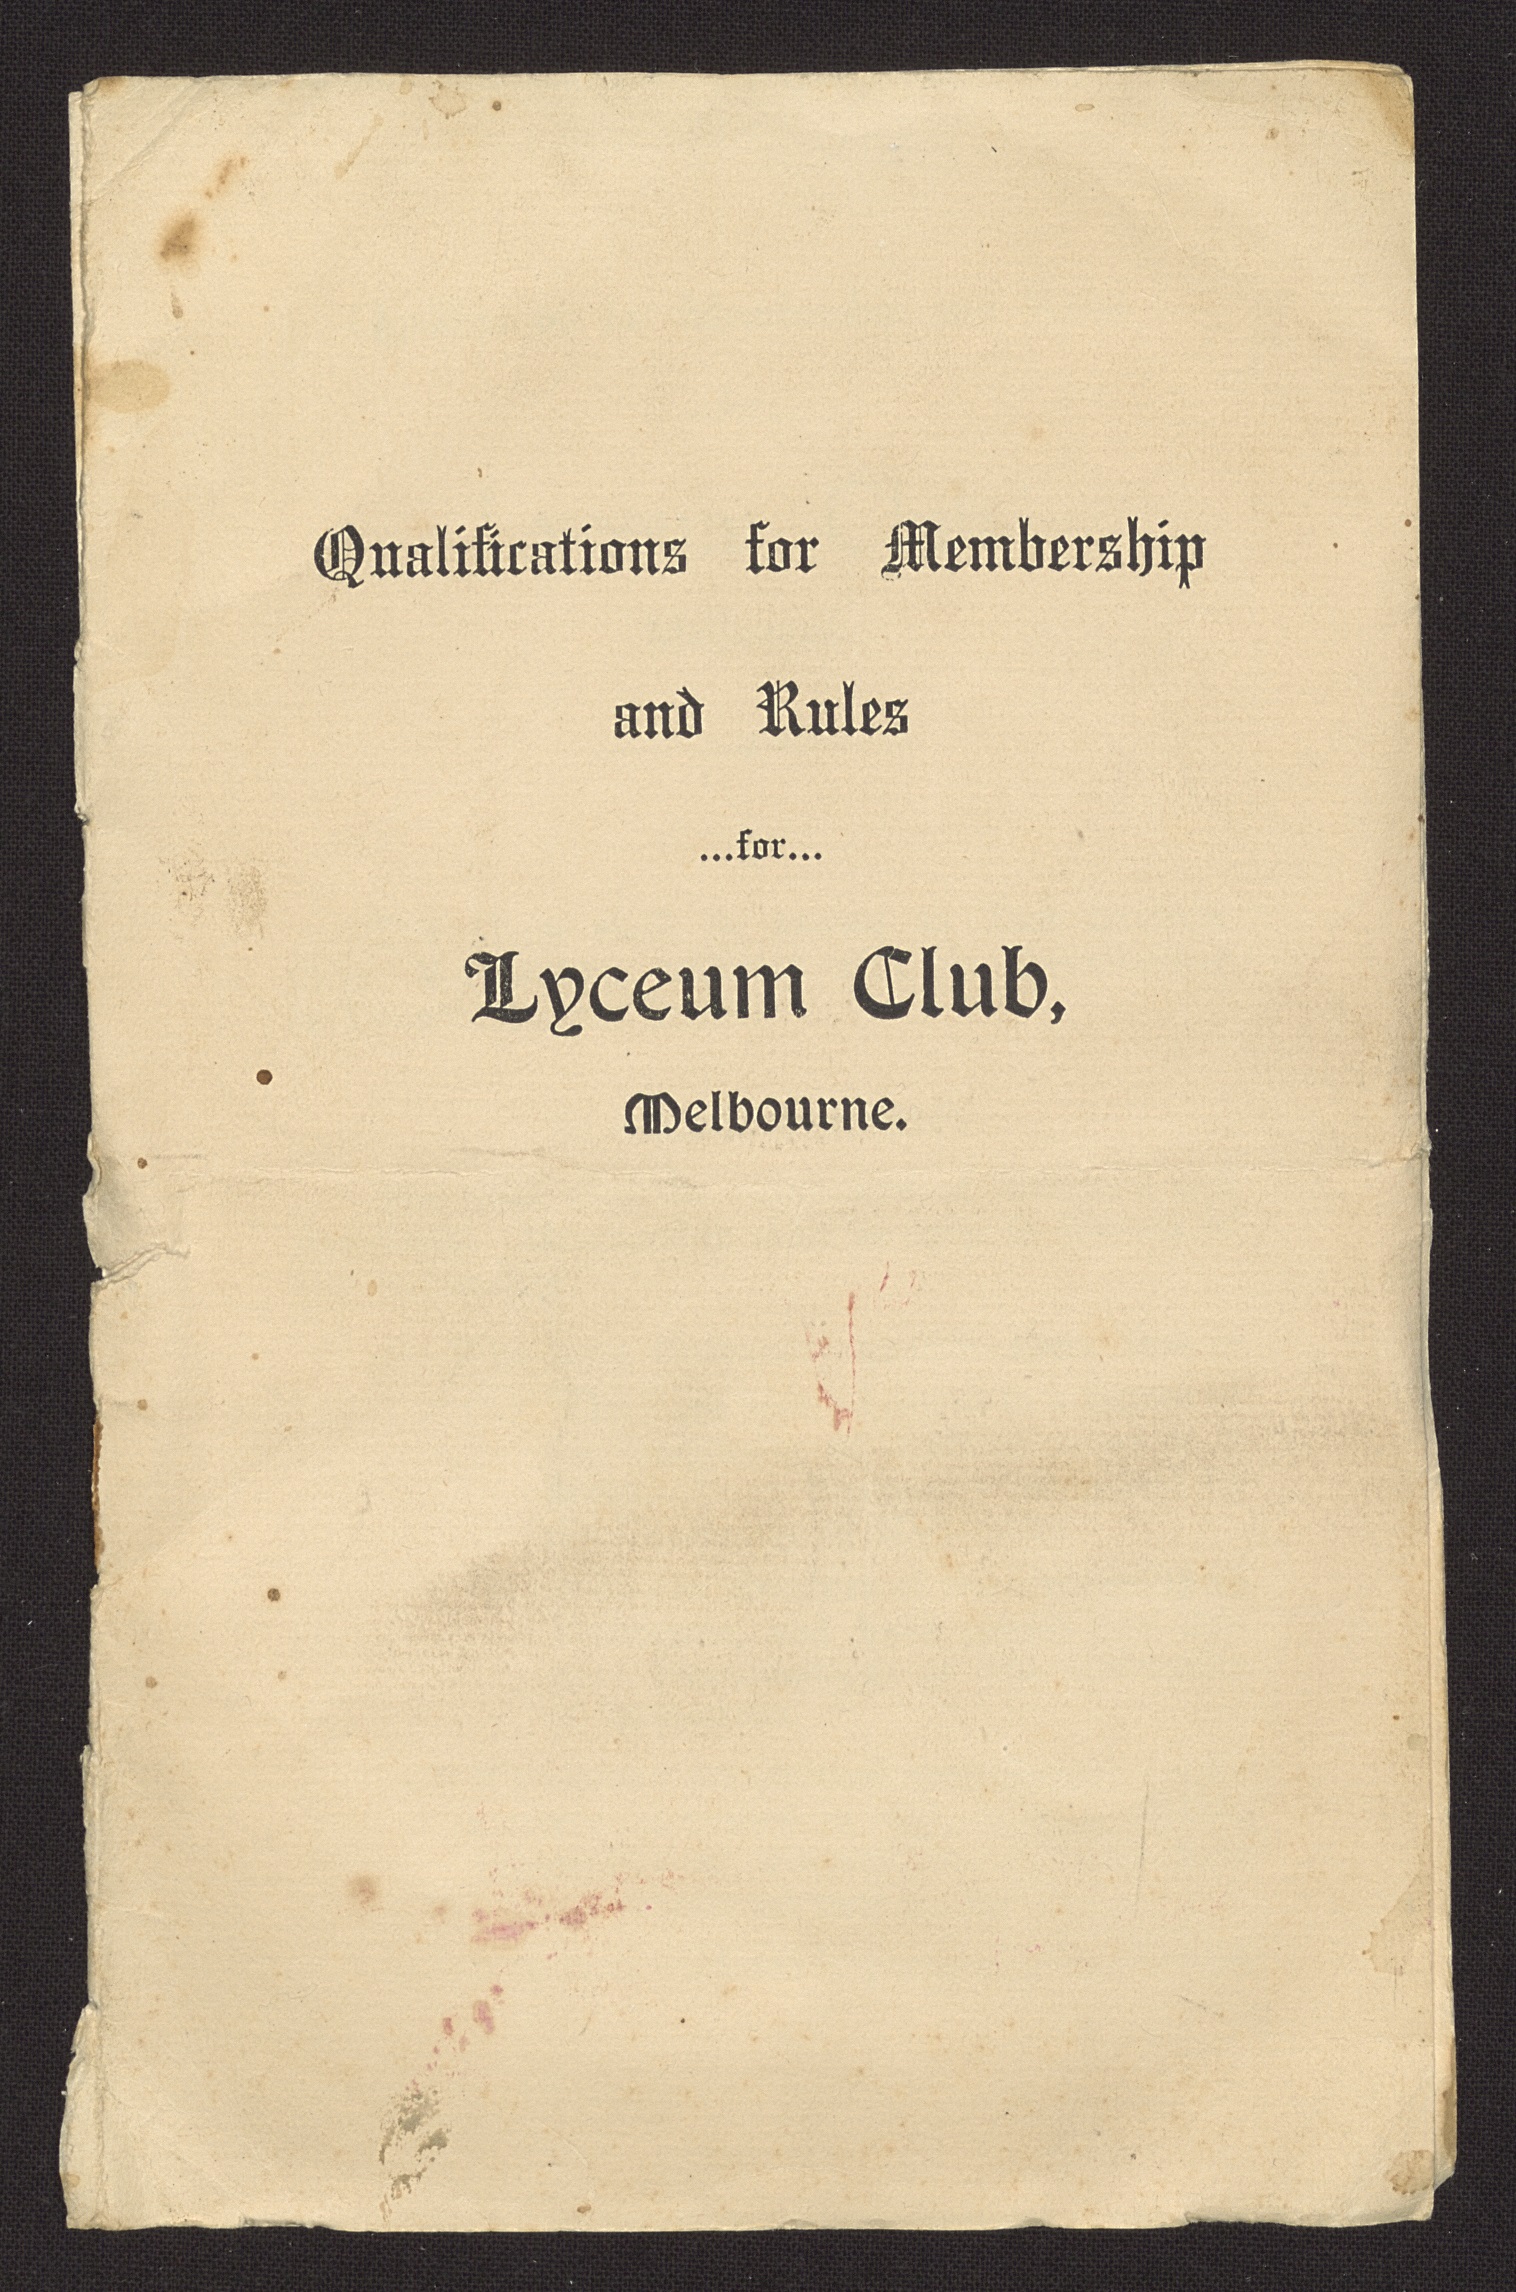 Qualifications for Membership and Rules for Lyceum Club Melbourne, Papers of Frances Derham, 1988.0061.01560